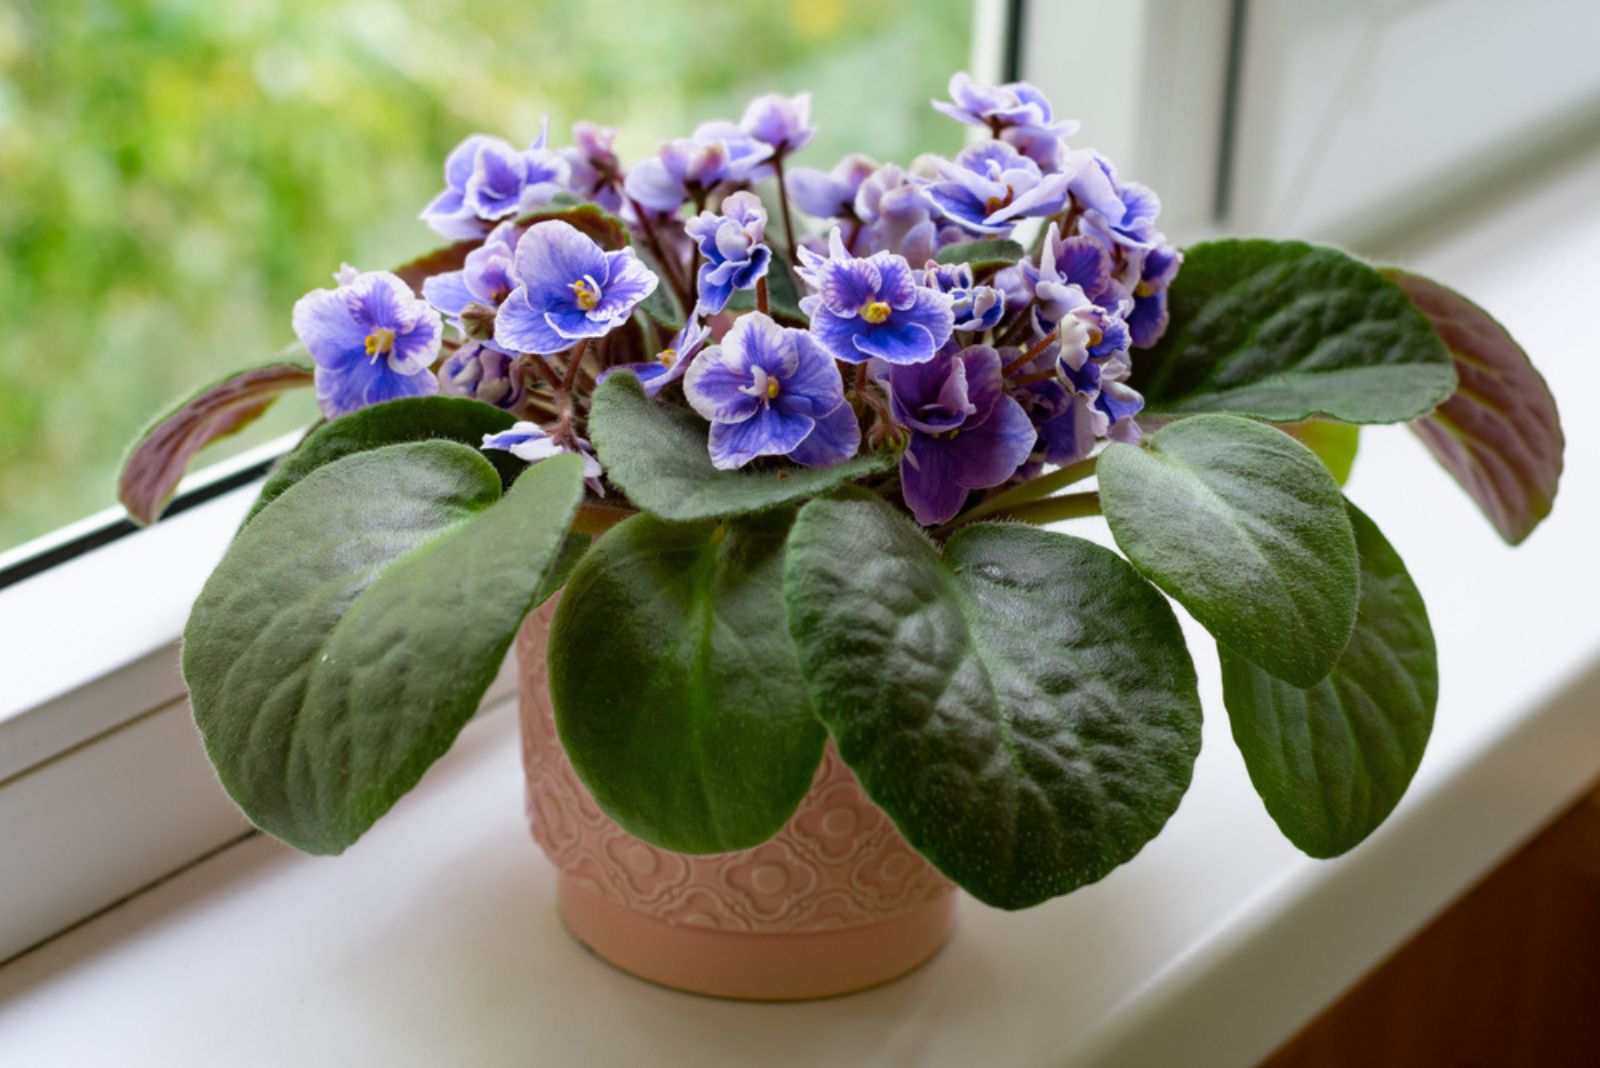 African Violet in a brown pot by the window